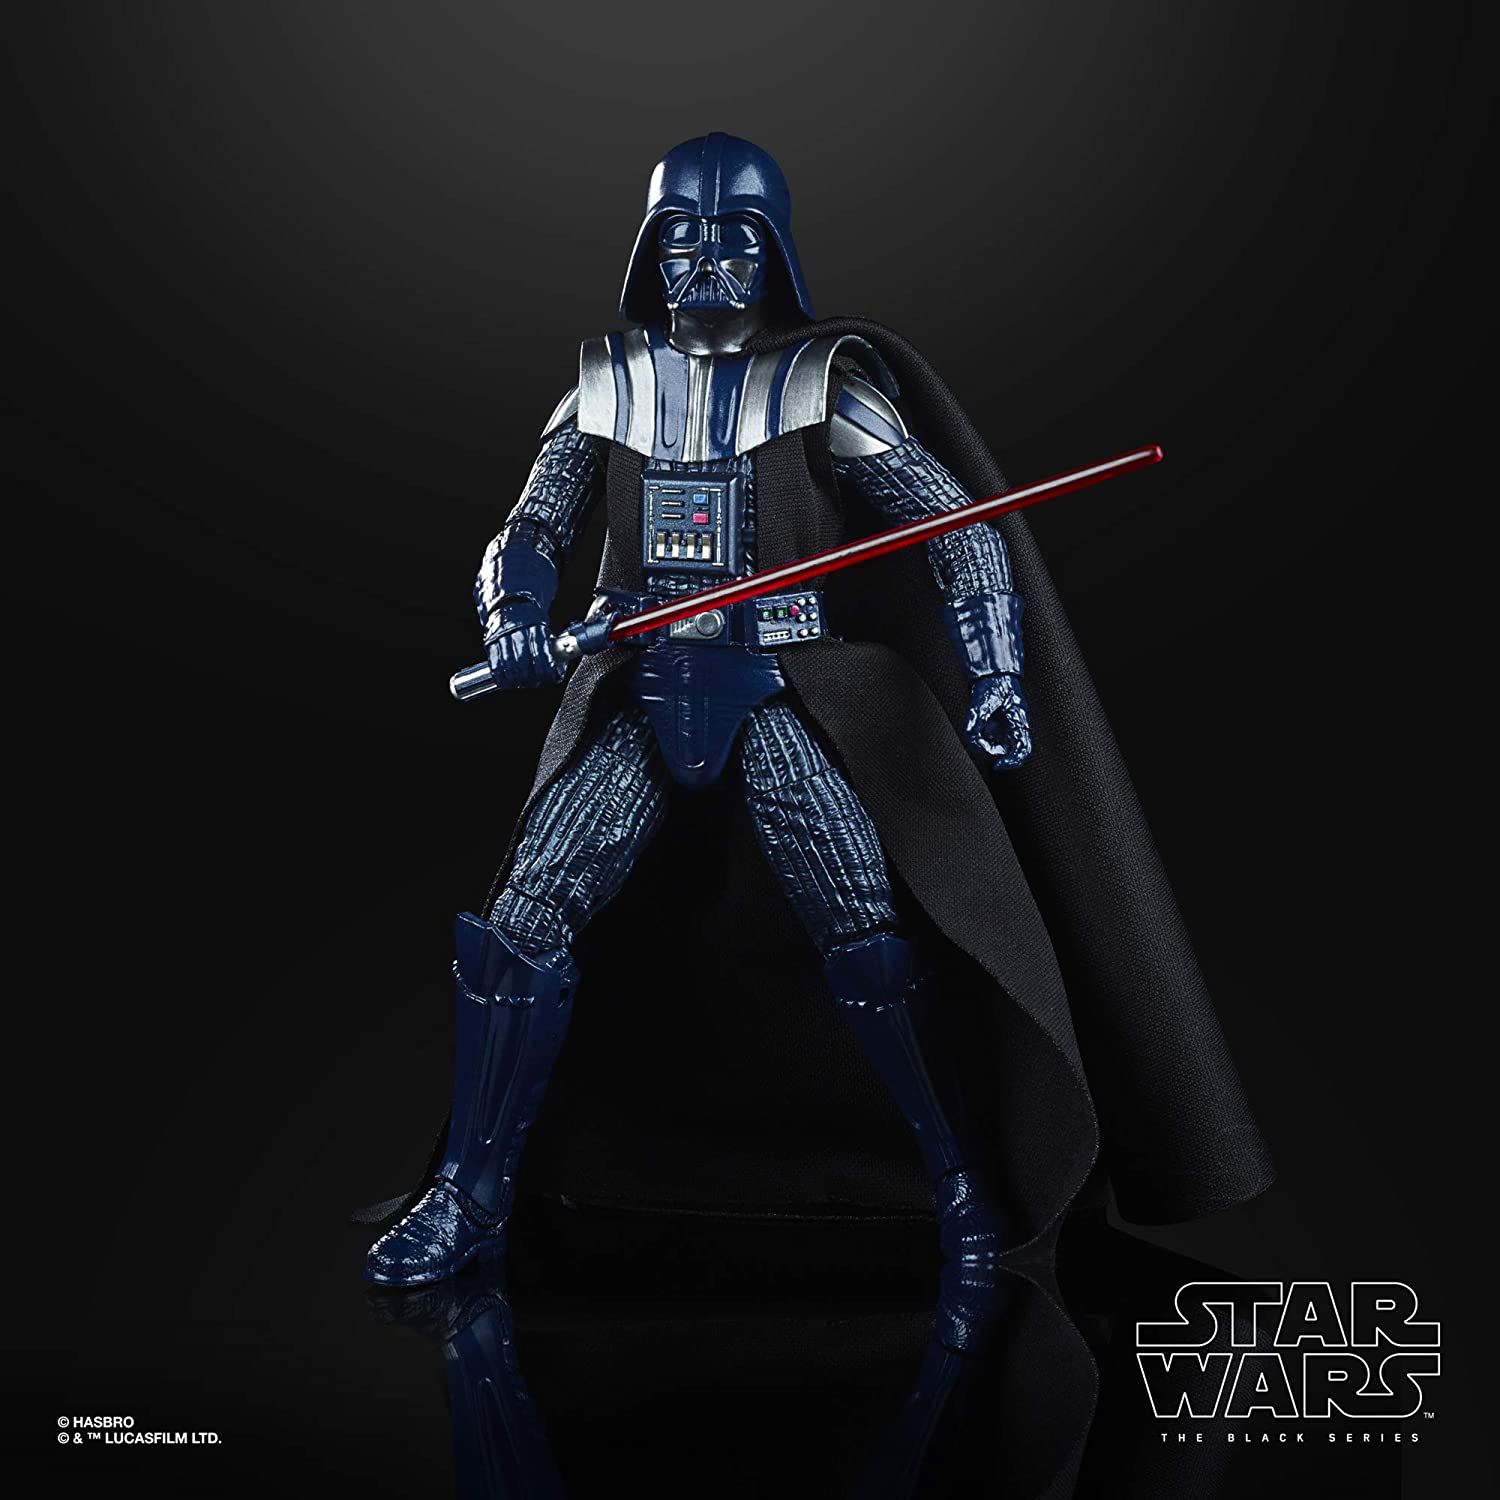 Hasbro Star Wars Black Series 40th Carbonized Graphite Darth Vader Exclusive 6 Inch Action Figure